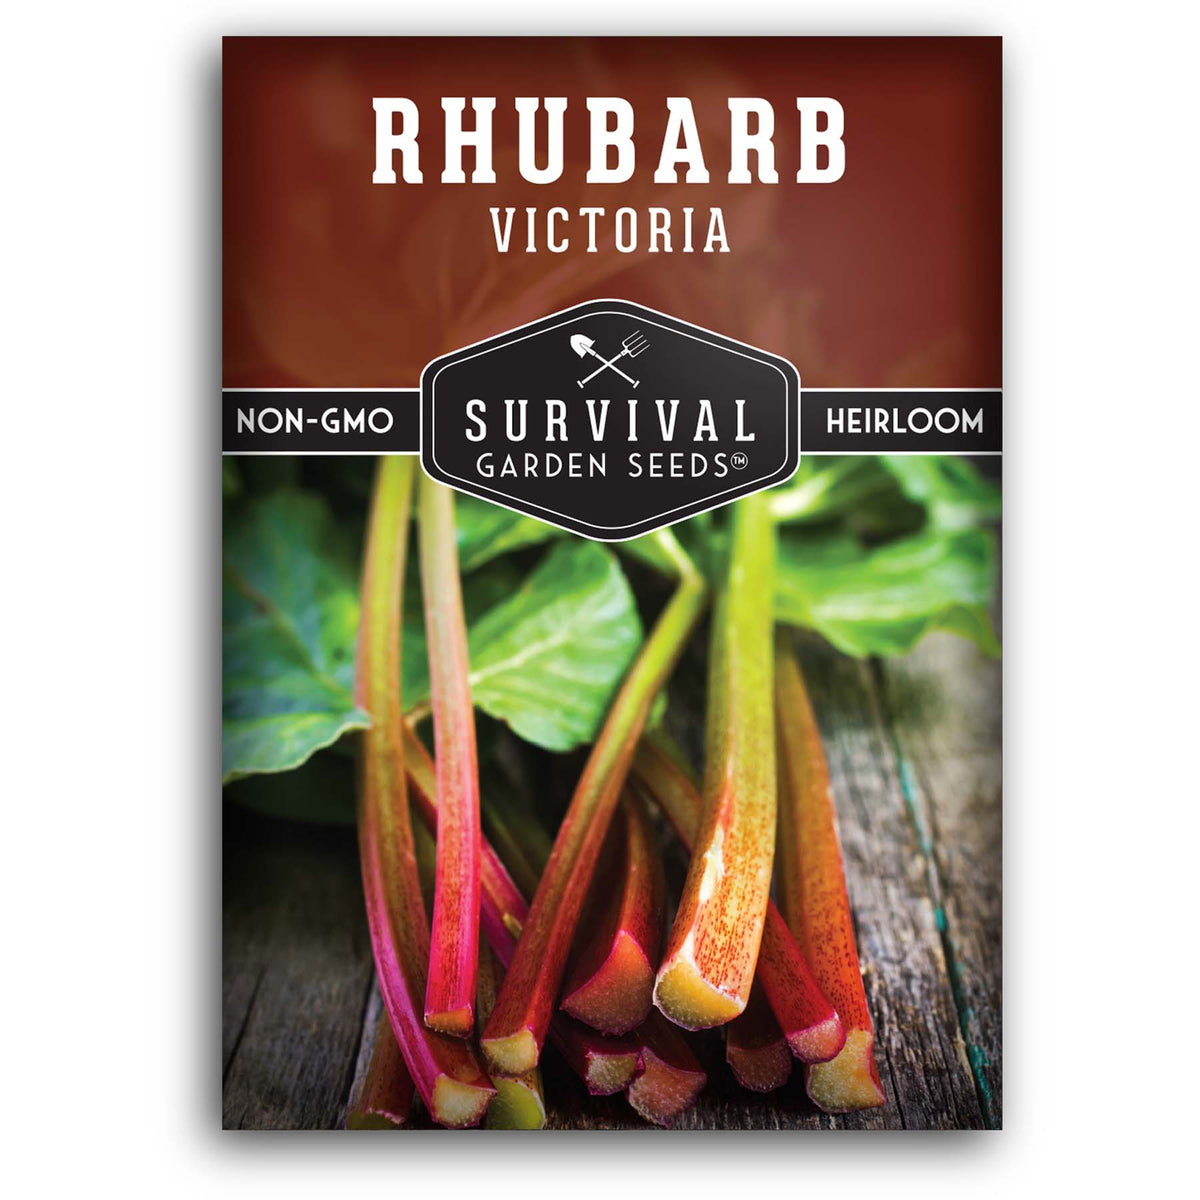 Victoria Rhubarb seeds for planting